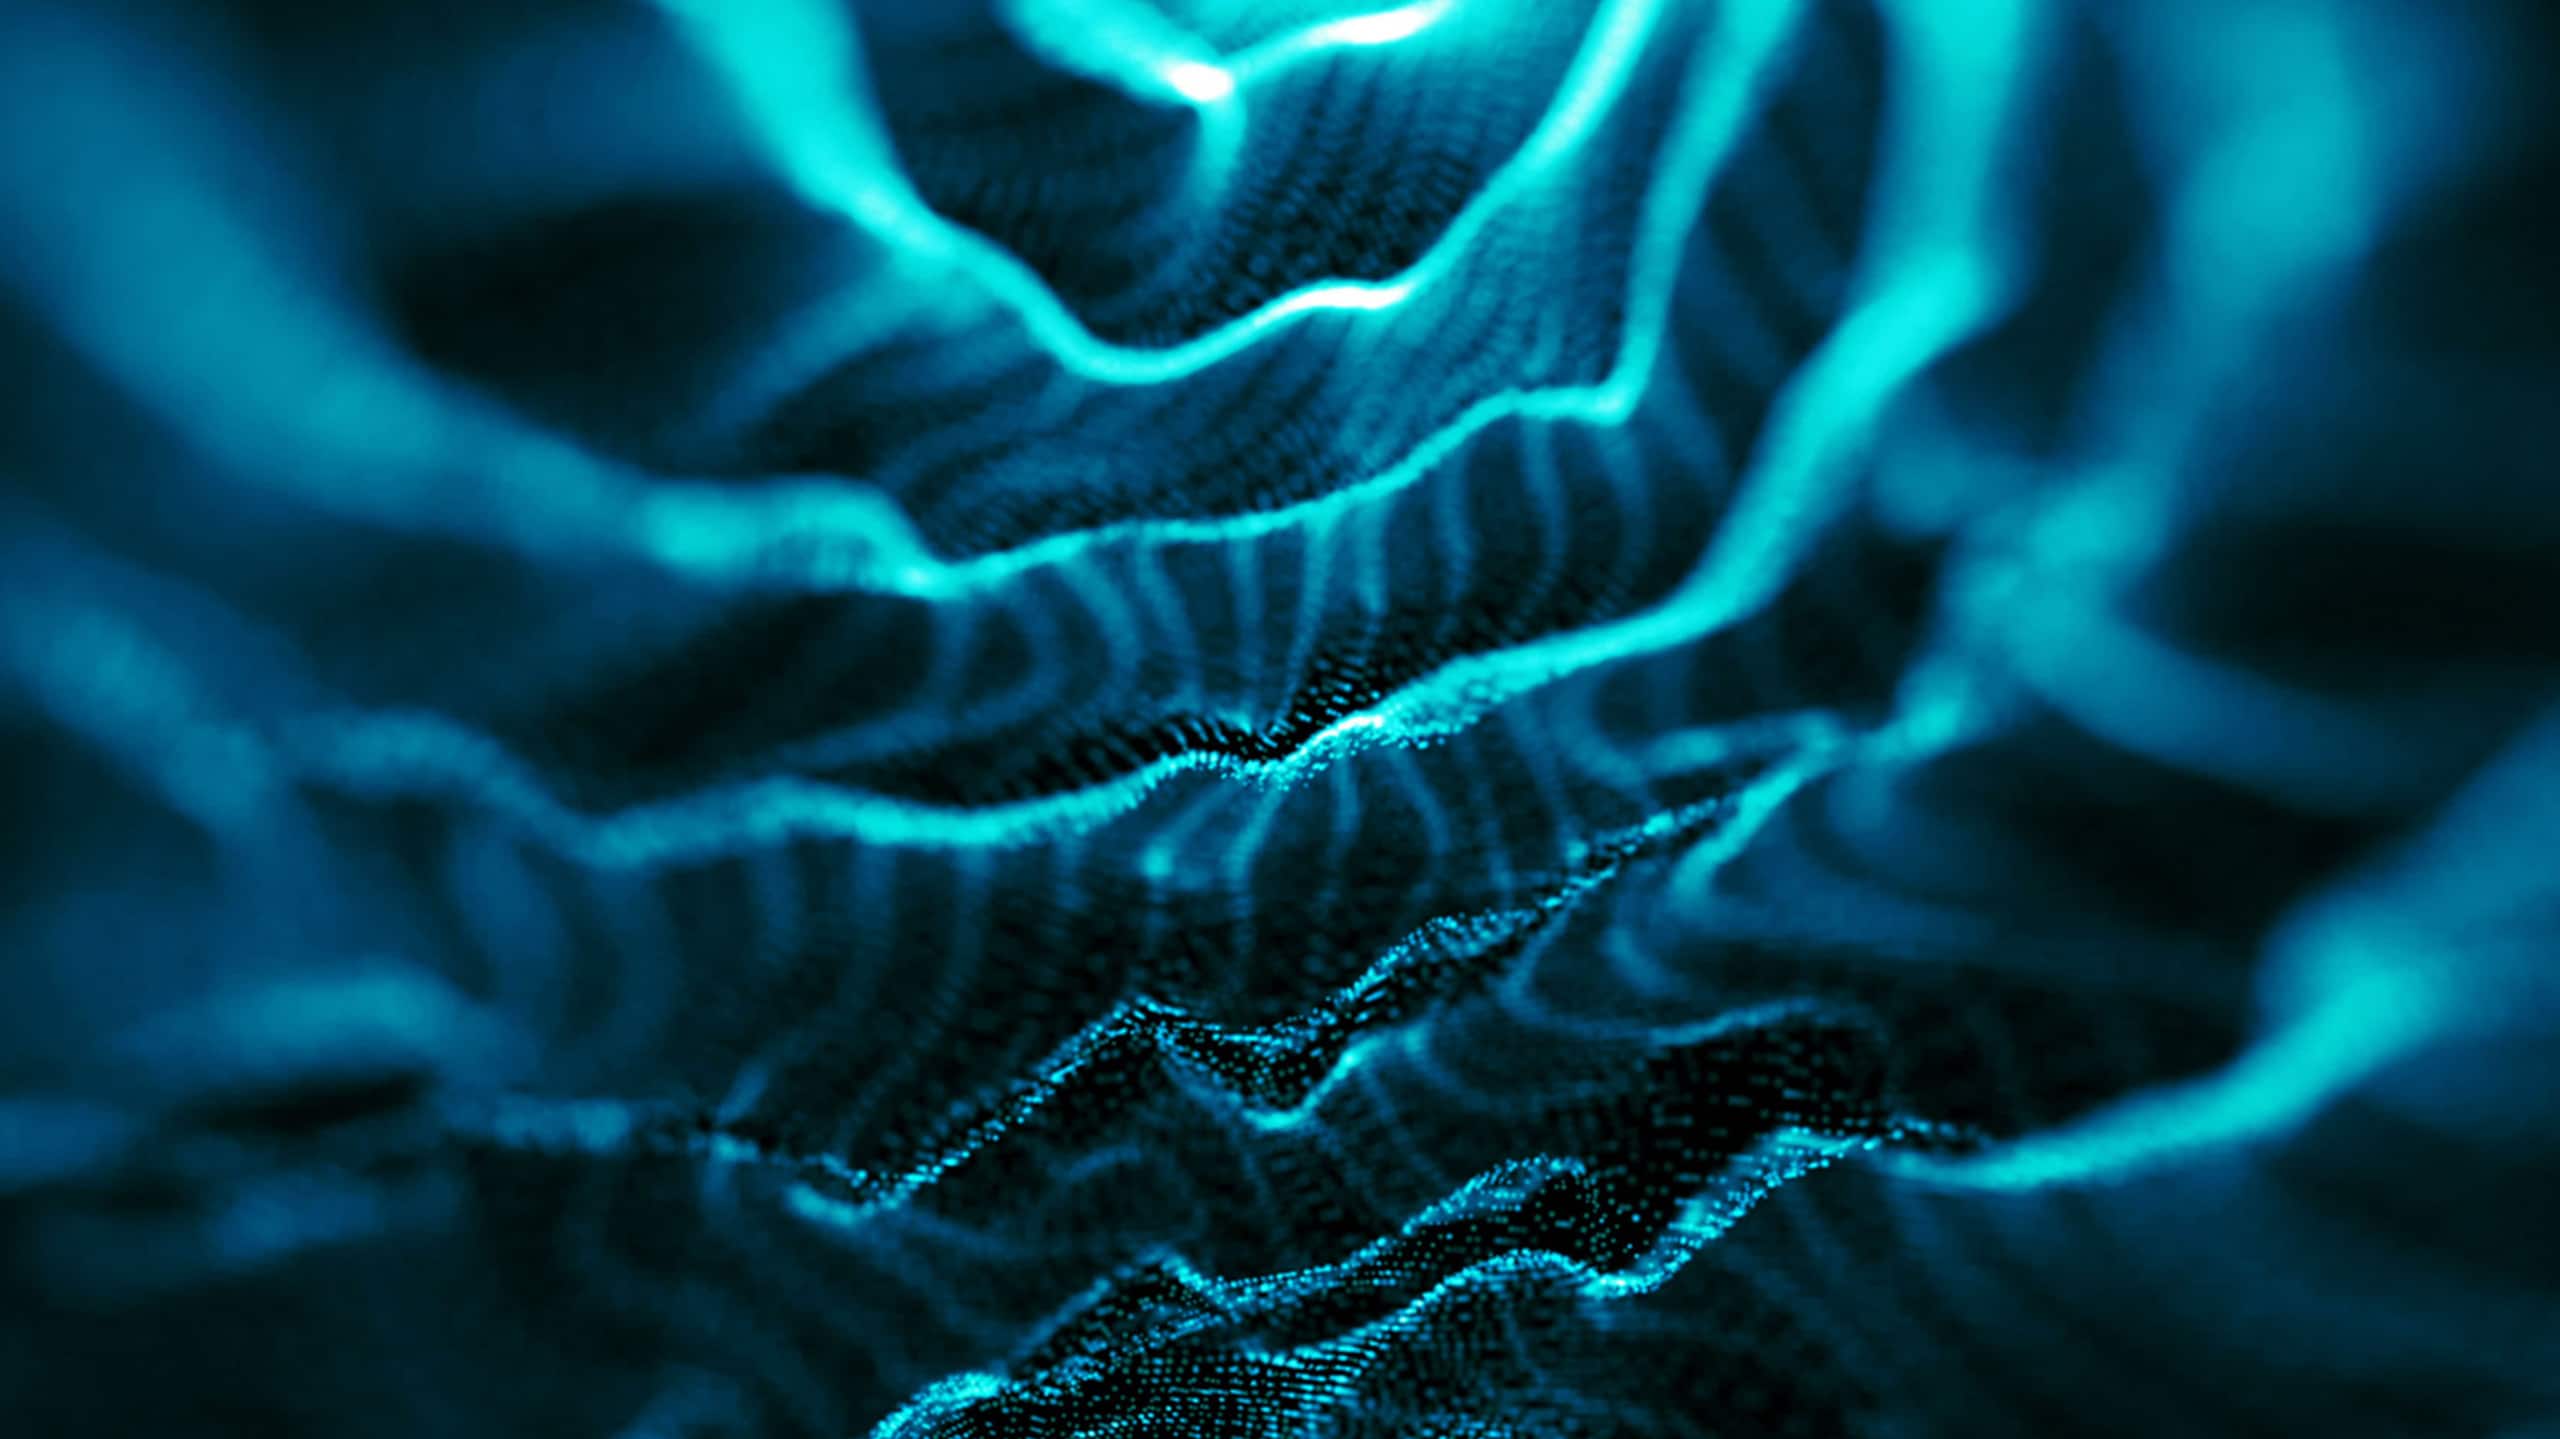 Abstract digital image depicting a flowing blue and black wave pattern with glowing cyan highlights, visualizing data or sound waves in a dynamic, close-up view, navigating the world of AI.